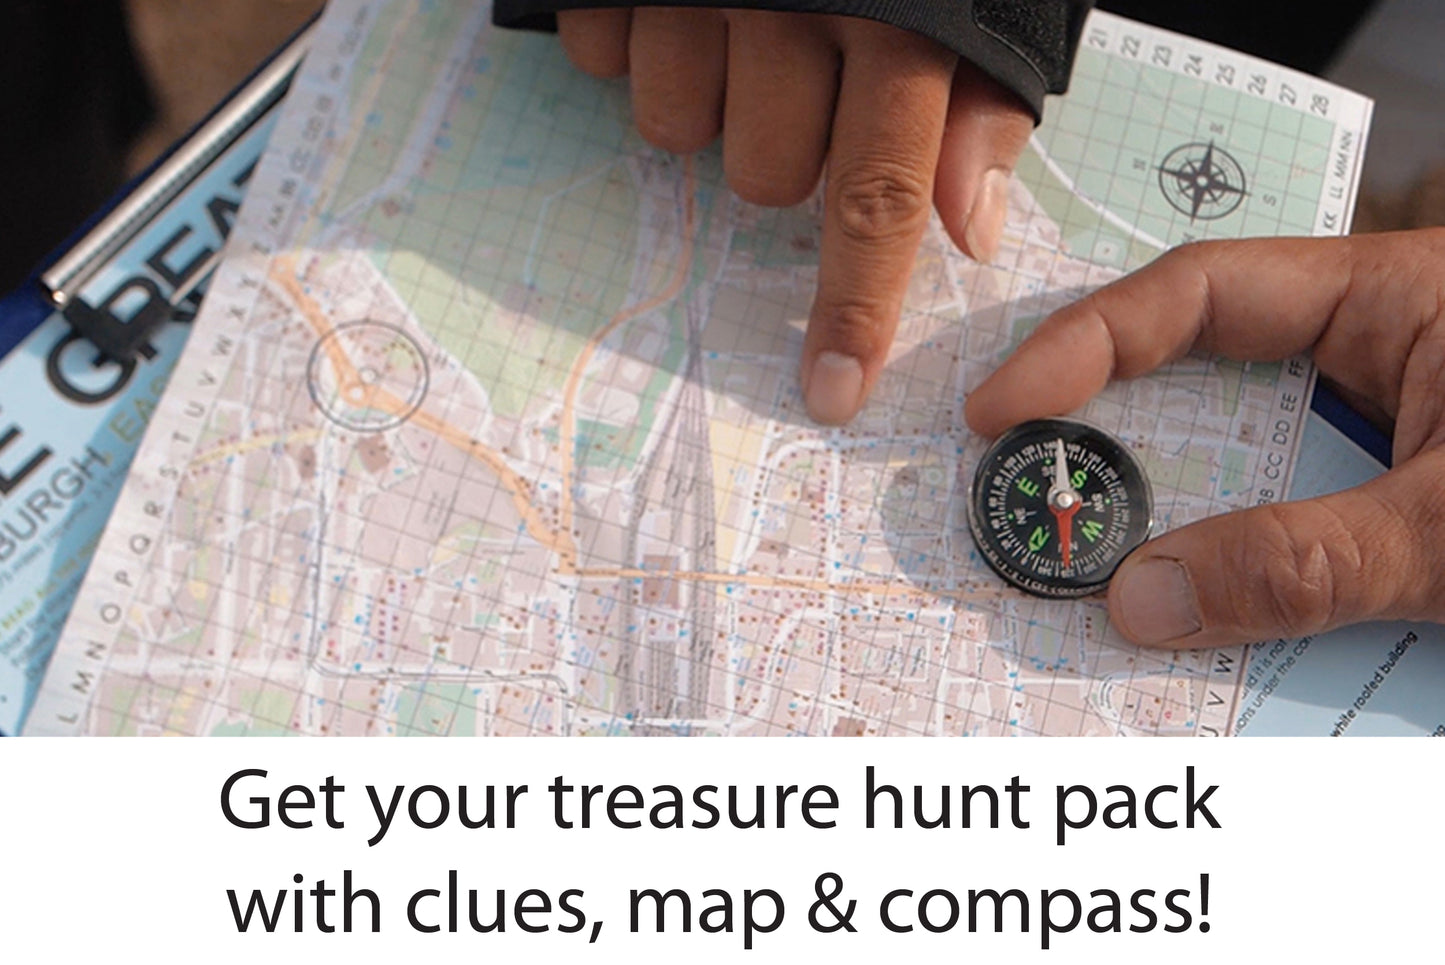 The City of London Treasure Hunt North Red Route